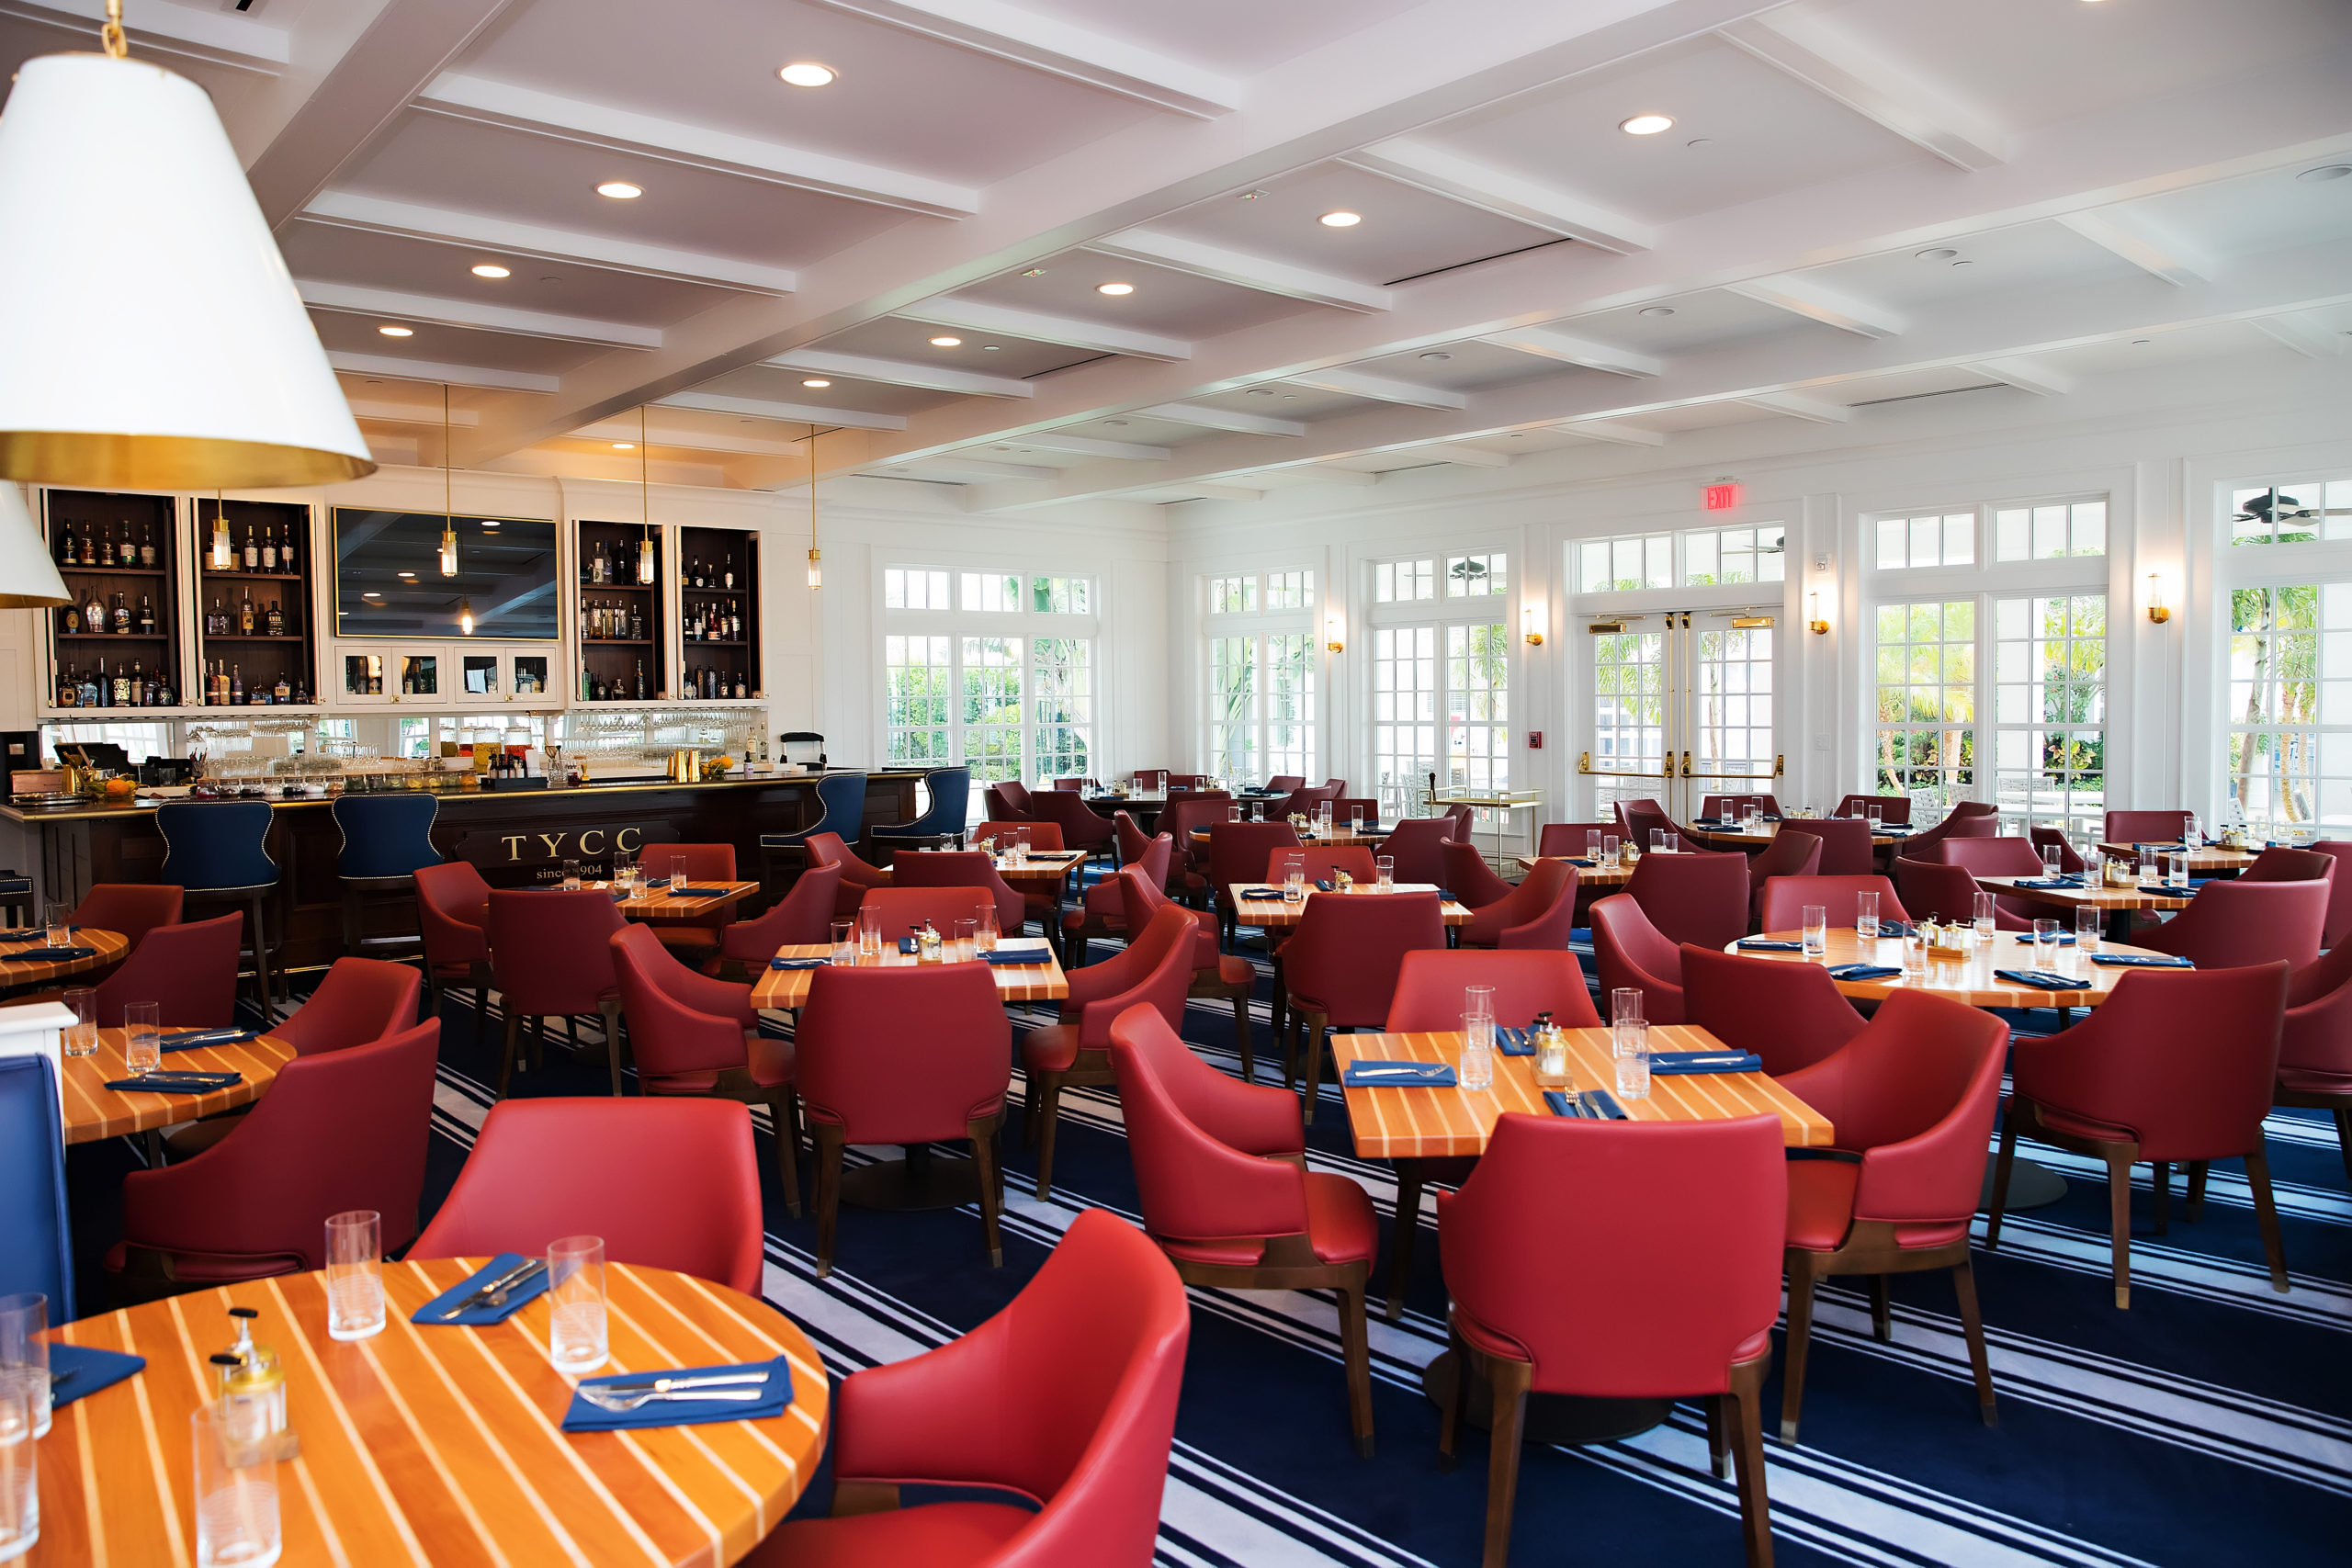 A dining room and bar view at the Tampa Yacht and Country Club with dtriped carpet, red dinign chairs and tables that look like deck.